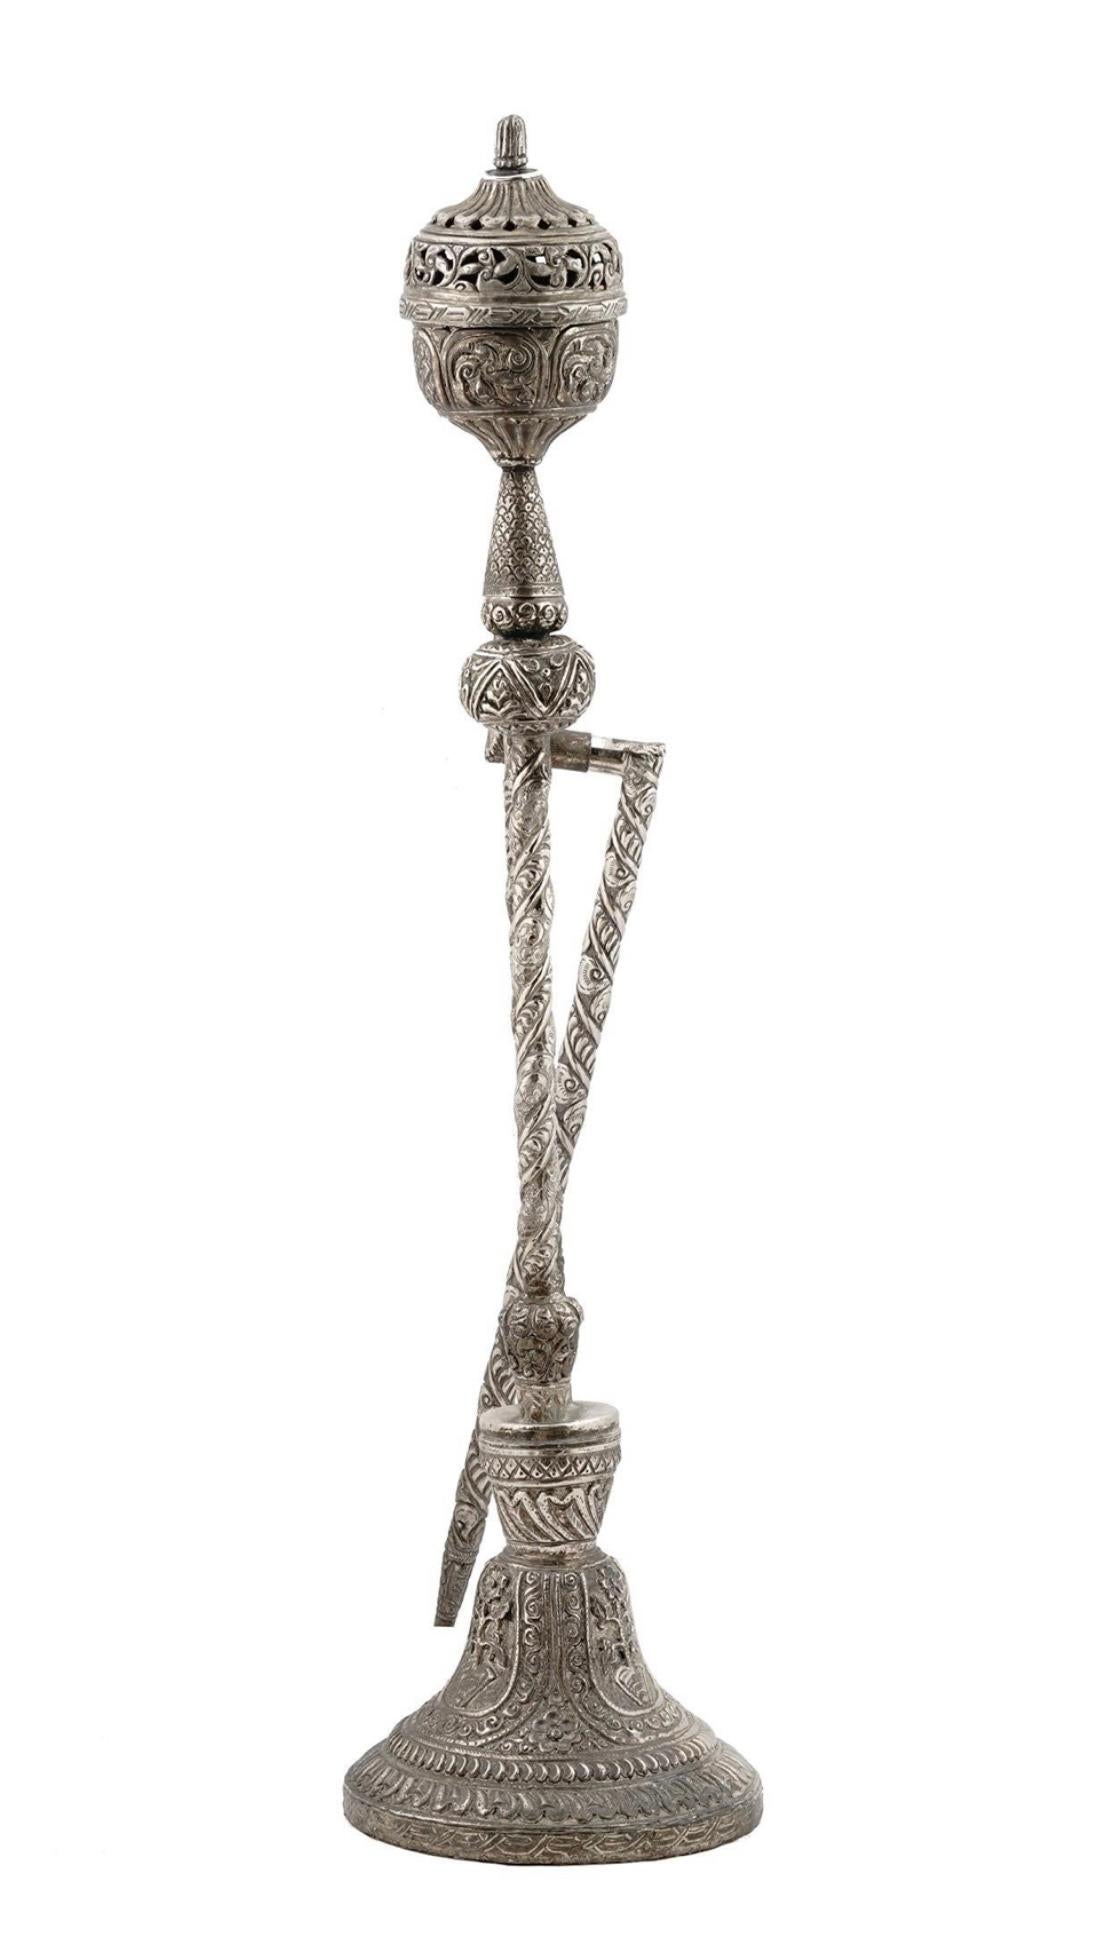  Large Indian repouse Middle Eastern style Silver plated  Hookah measuring 34 inches tall on stand measuring 8 1/4 inches across.  In good conditi